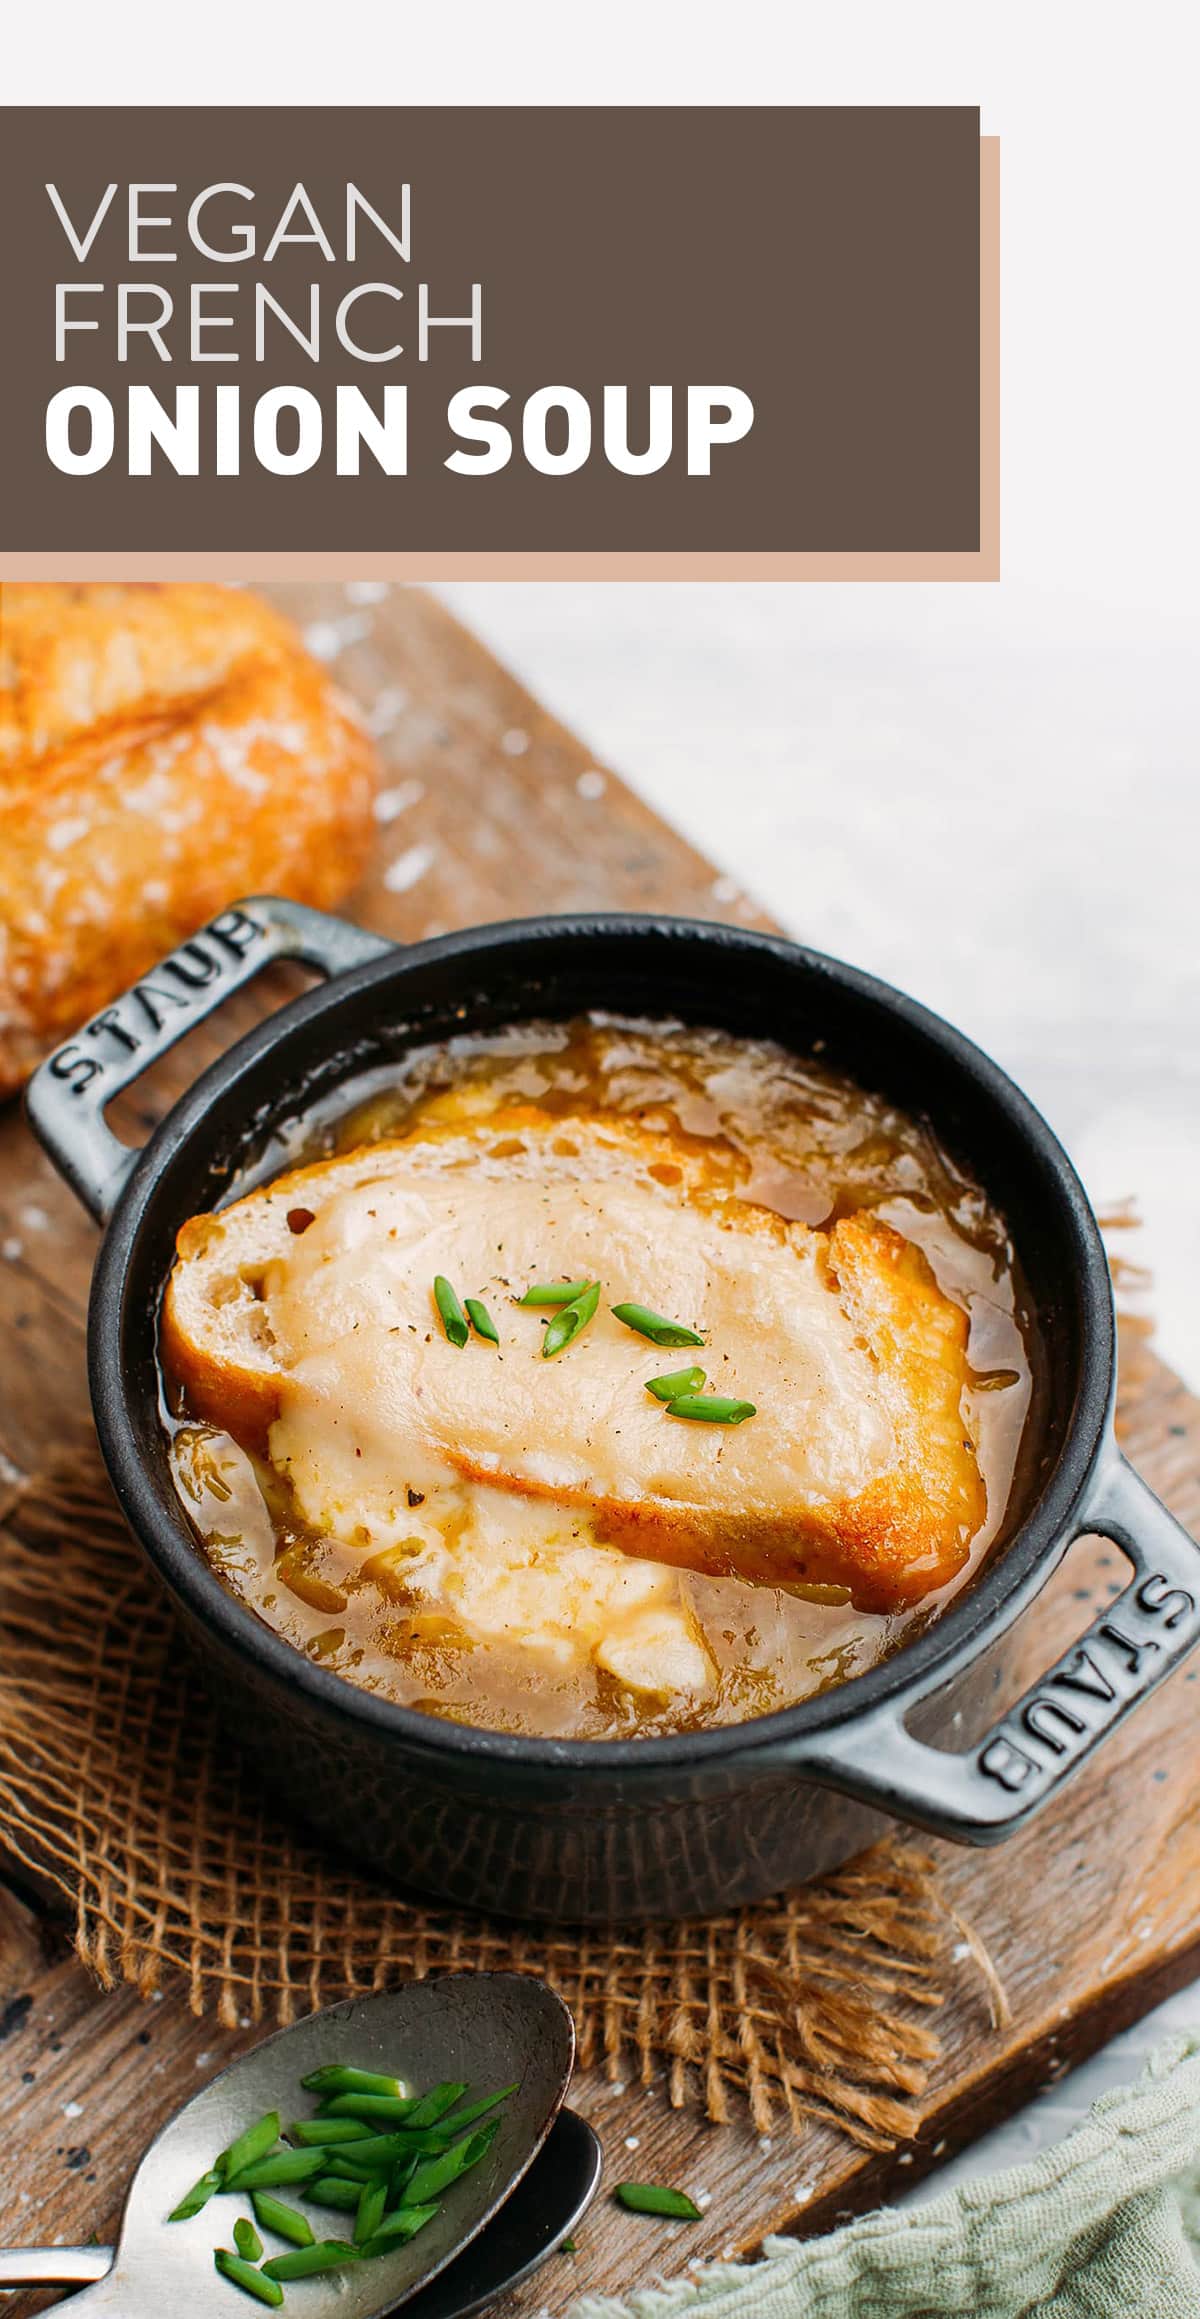 Warm up with this fantastic vegan French onion soup! It is loaded with caramelized onions, topped with crispy bread, and comes with a creamy vegan cheese sauce! A rustic dish that is so comforting on cold days!